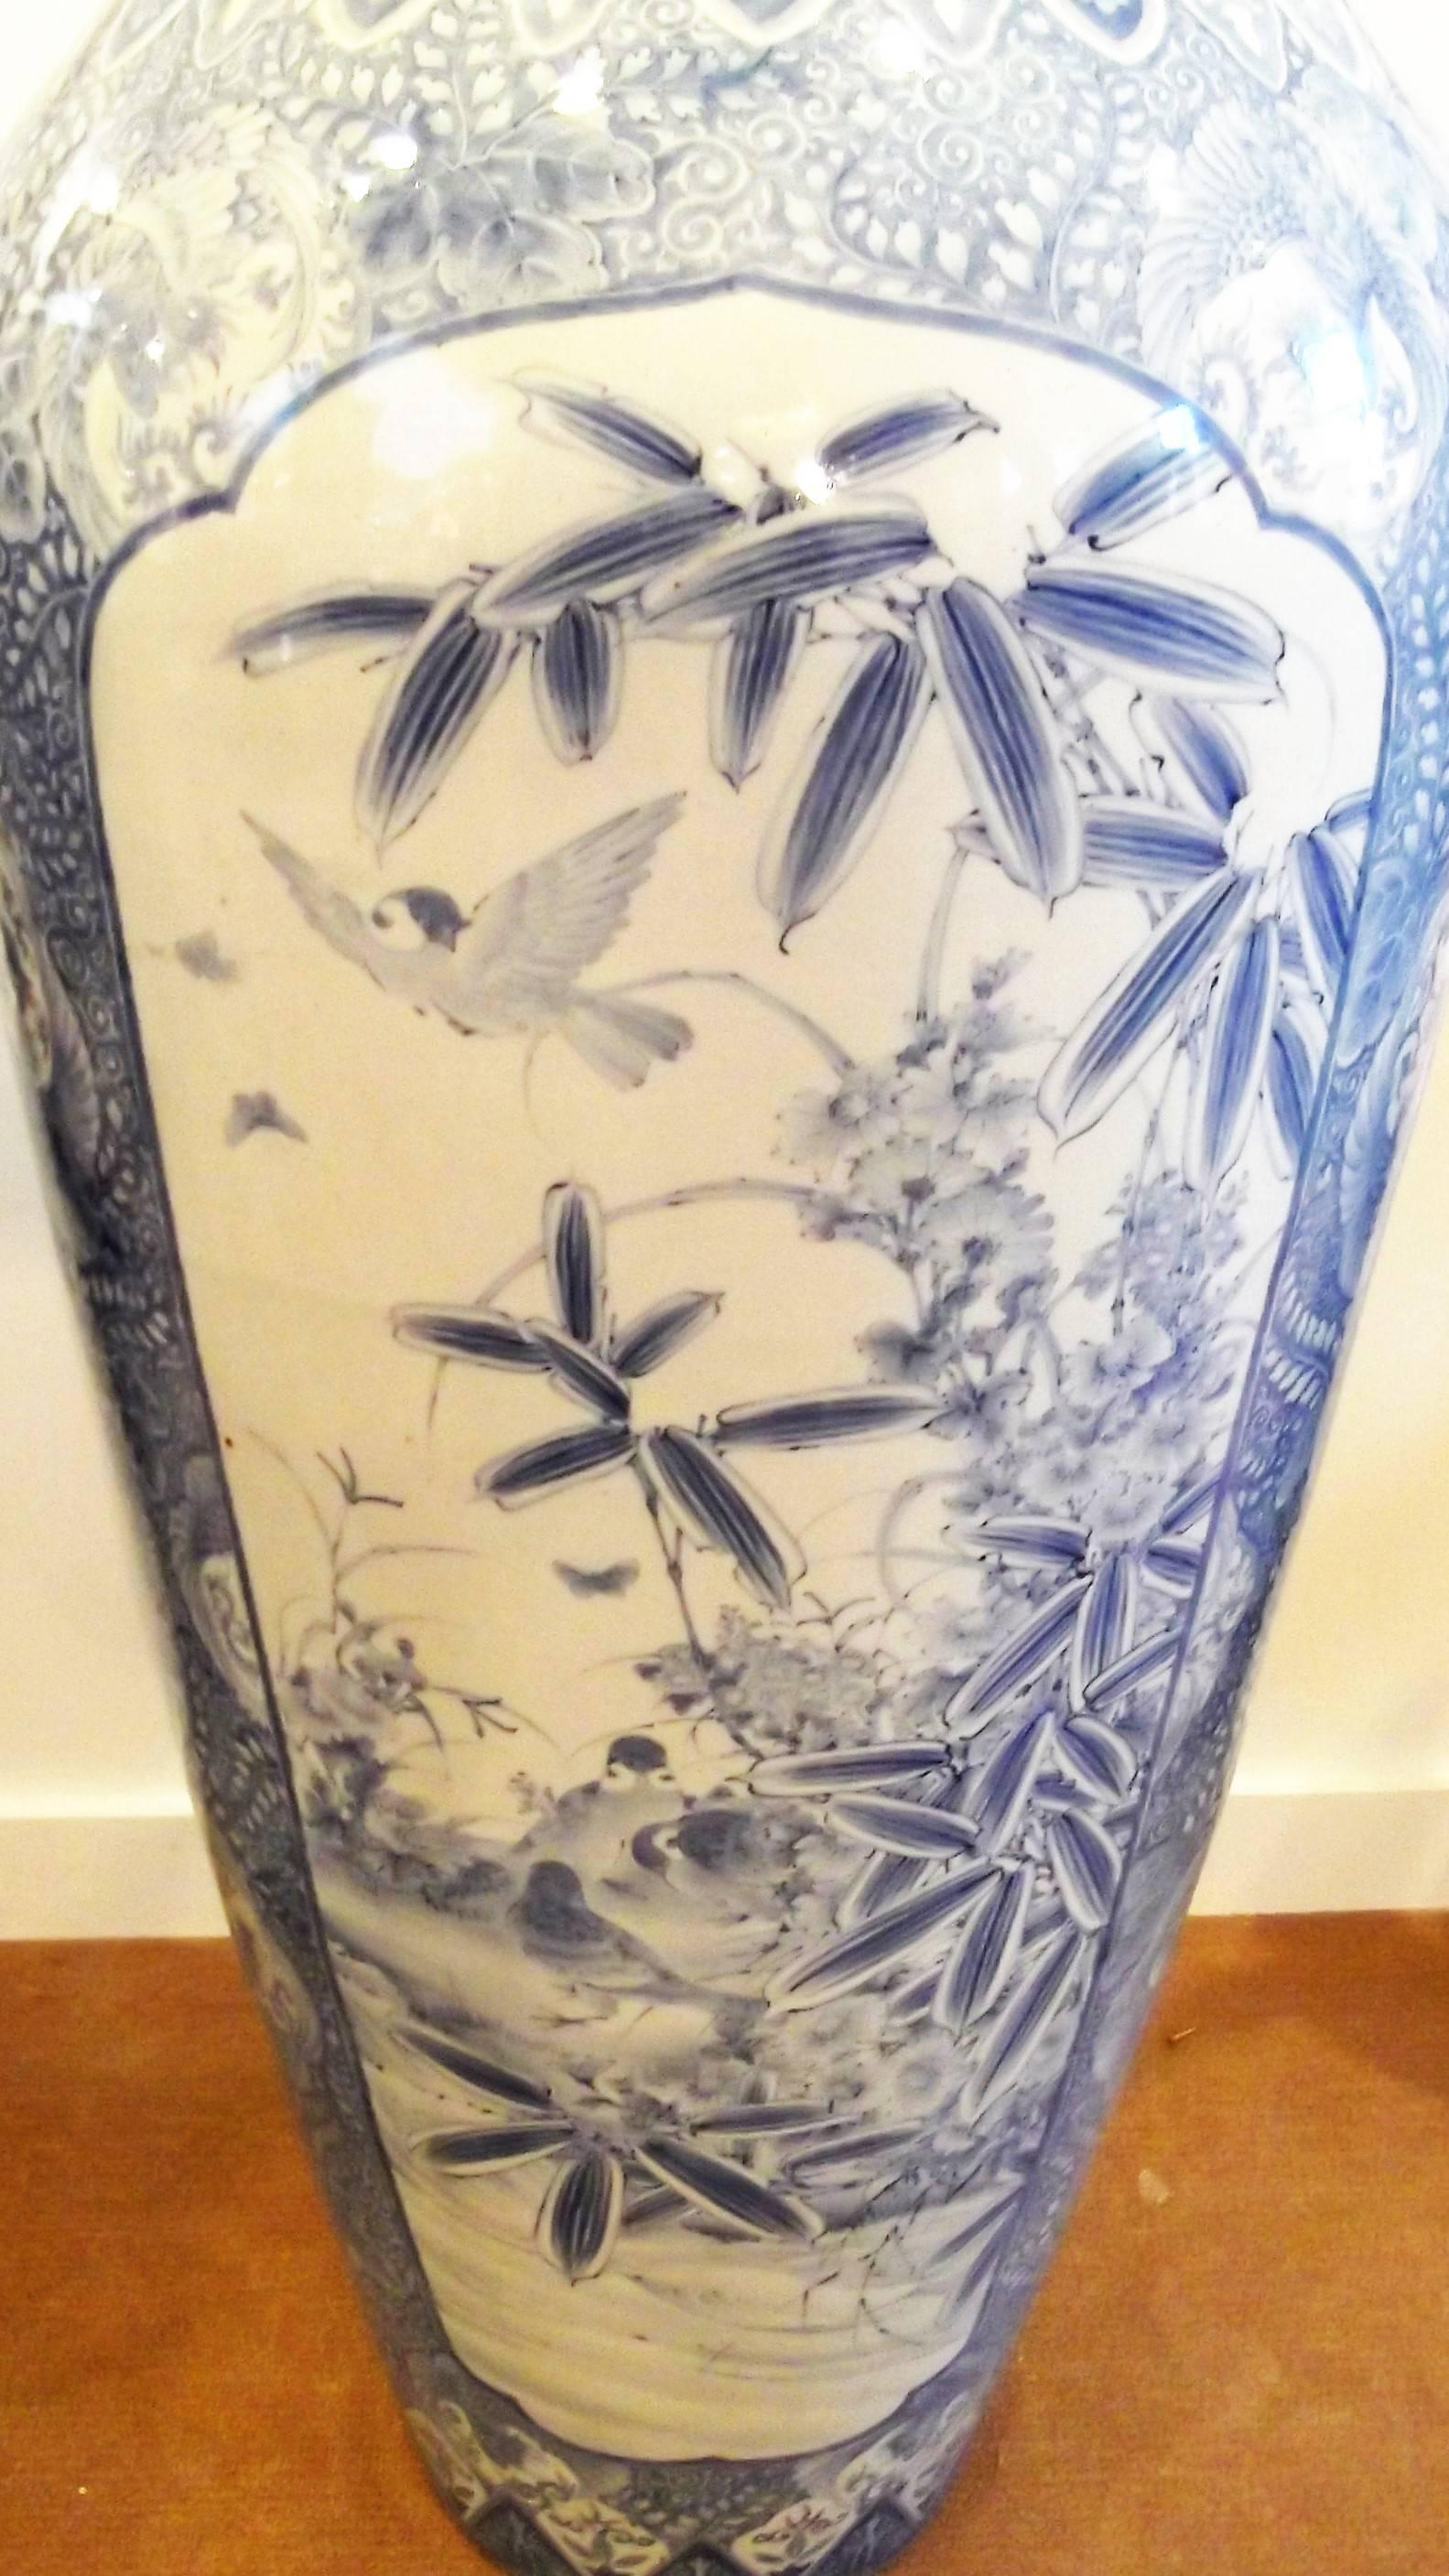 Beautify decorated Japanese blue and white Imari porcelain palace vase. Of typical form with hand painted birds, flowers and bamboo plants. The vase has three large cartouches on the sides separated by classic Japanese embellishments. There is a